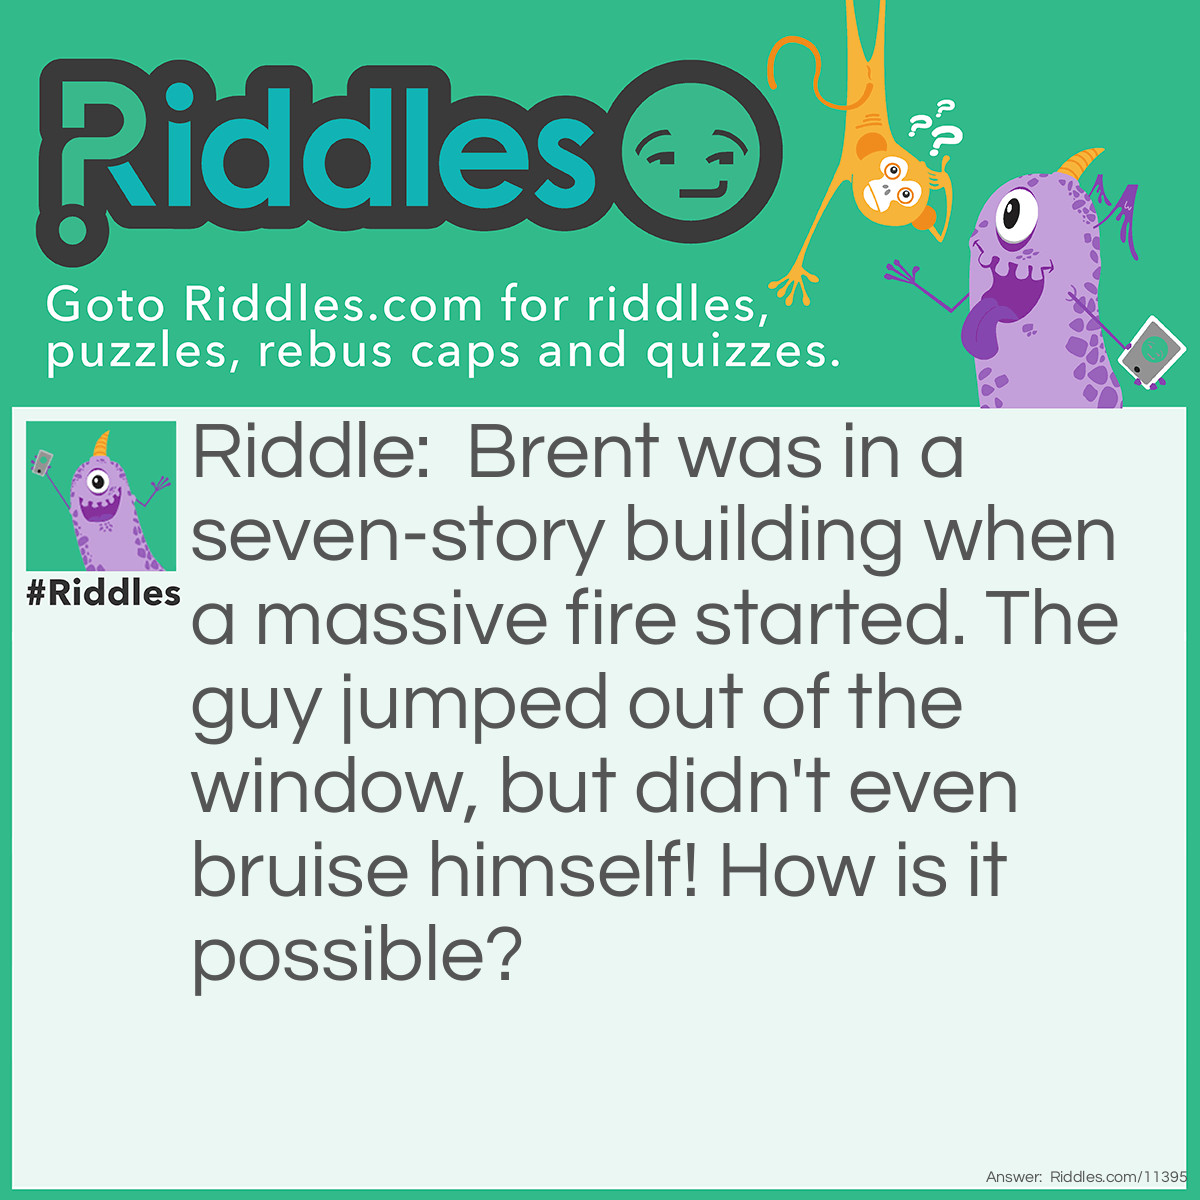 Riddle: Brent was in a seven-story building when a massive fire started. The guy jumped out of the window, but didn't even bruise himself! How is it possible? Answer: Brent was on the first floor, and jumped out of the first floor window. After all, even though it's a seven story building, I didn't say he was on the seventh floor!